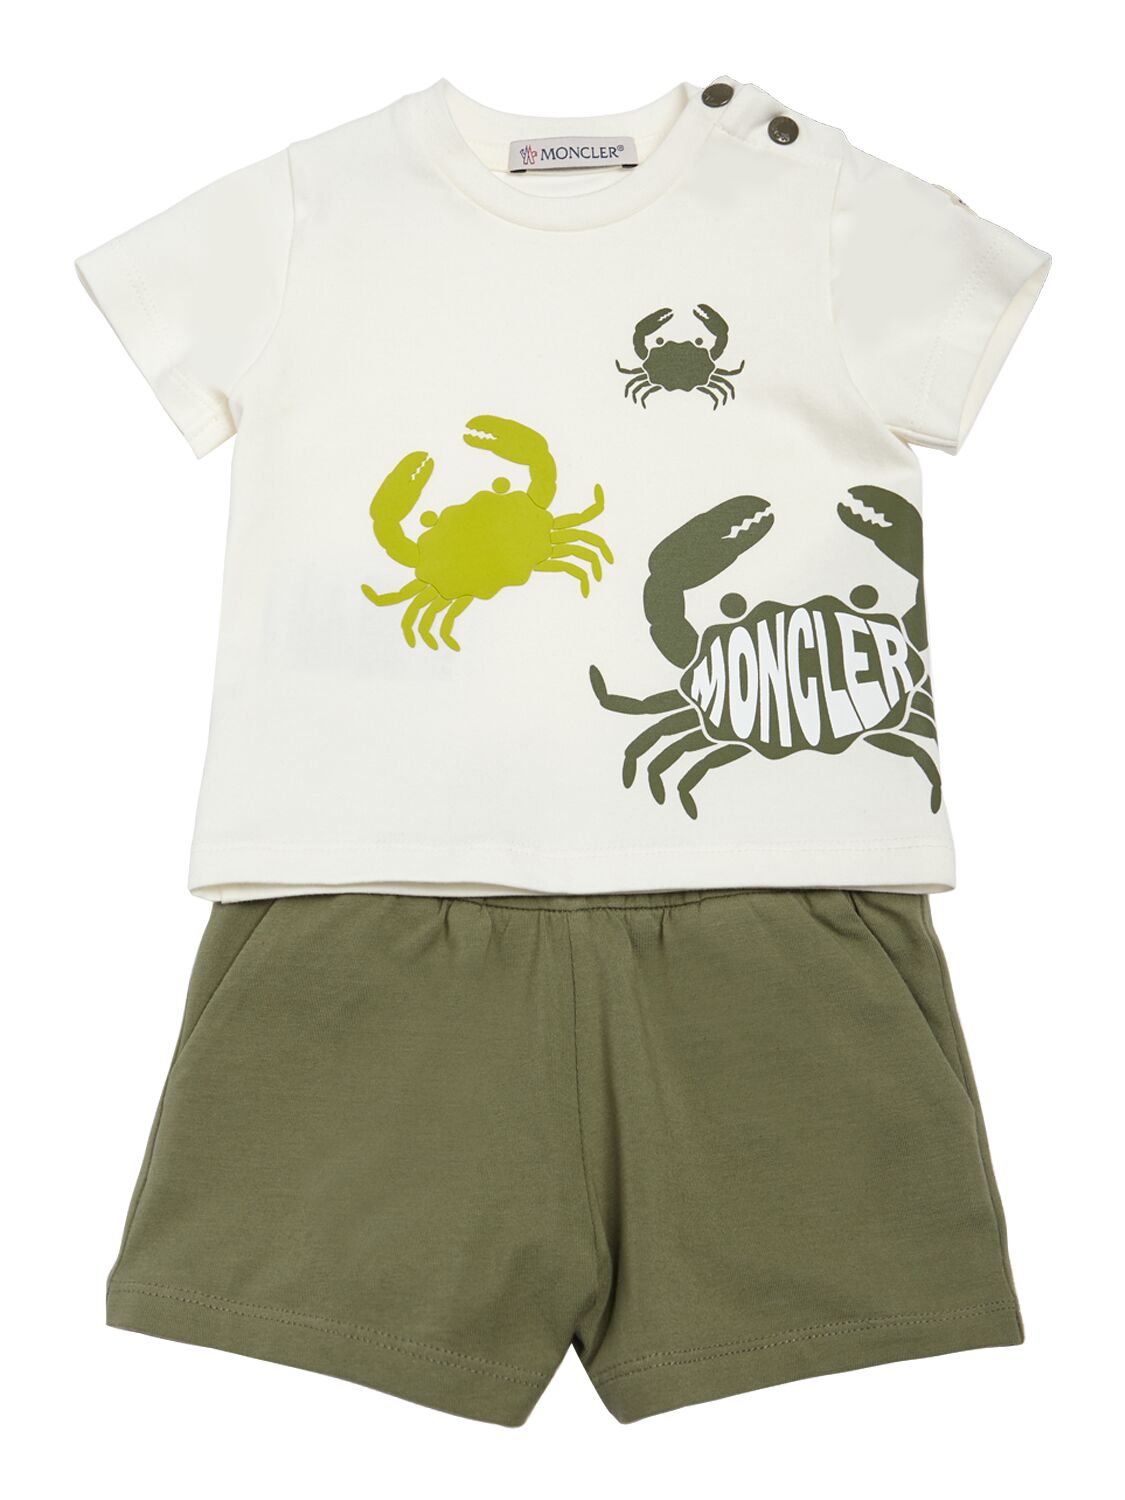 Moncler Kids' Stretch Cotton T-shirt & Shorts In White,green